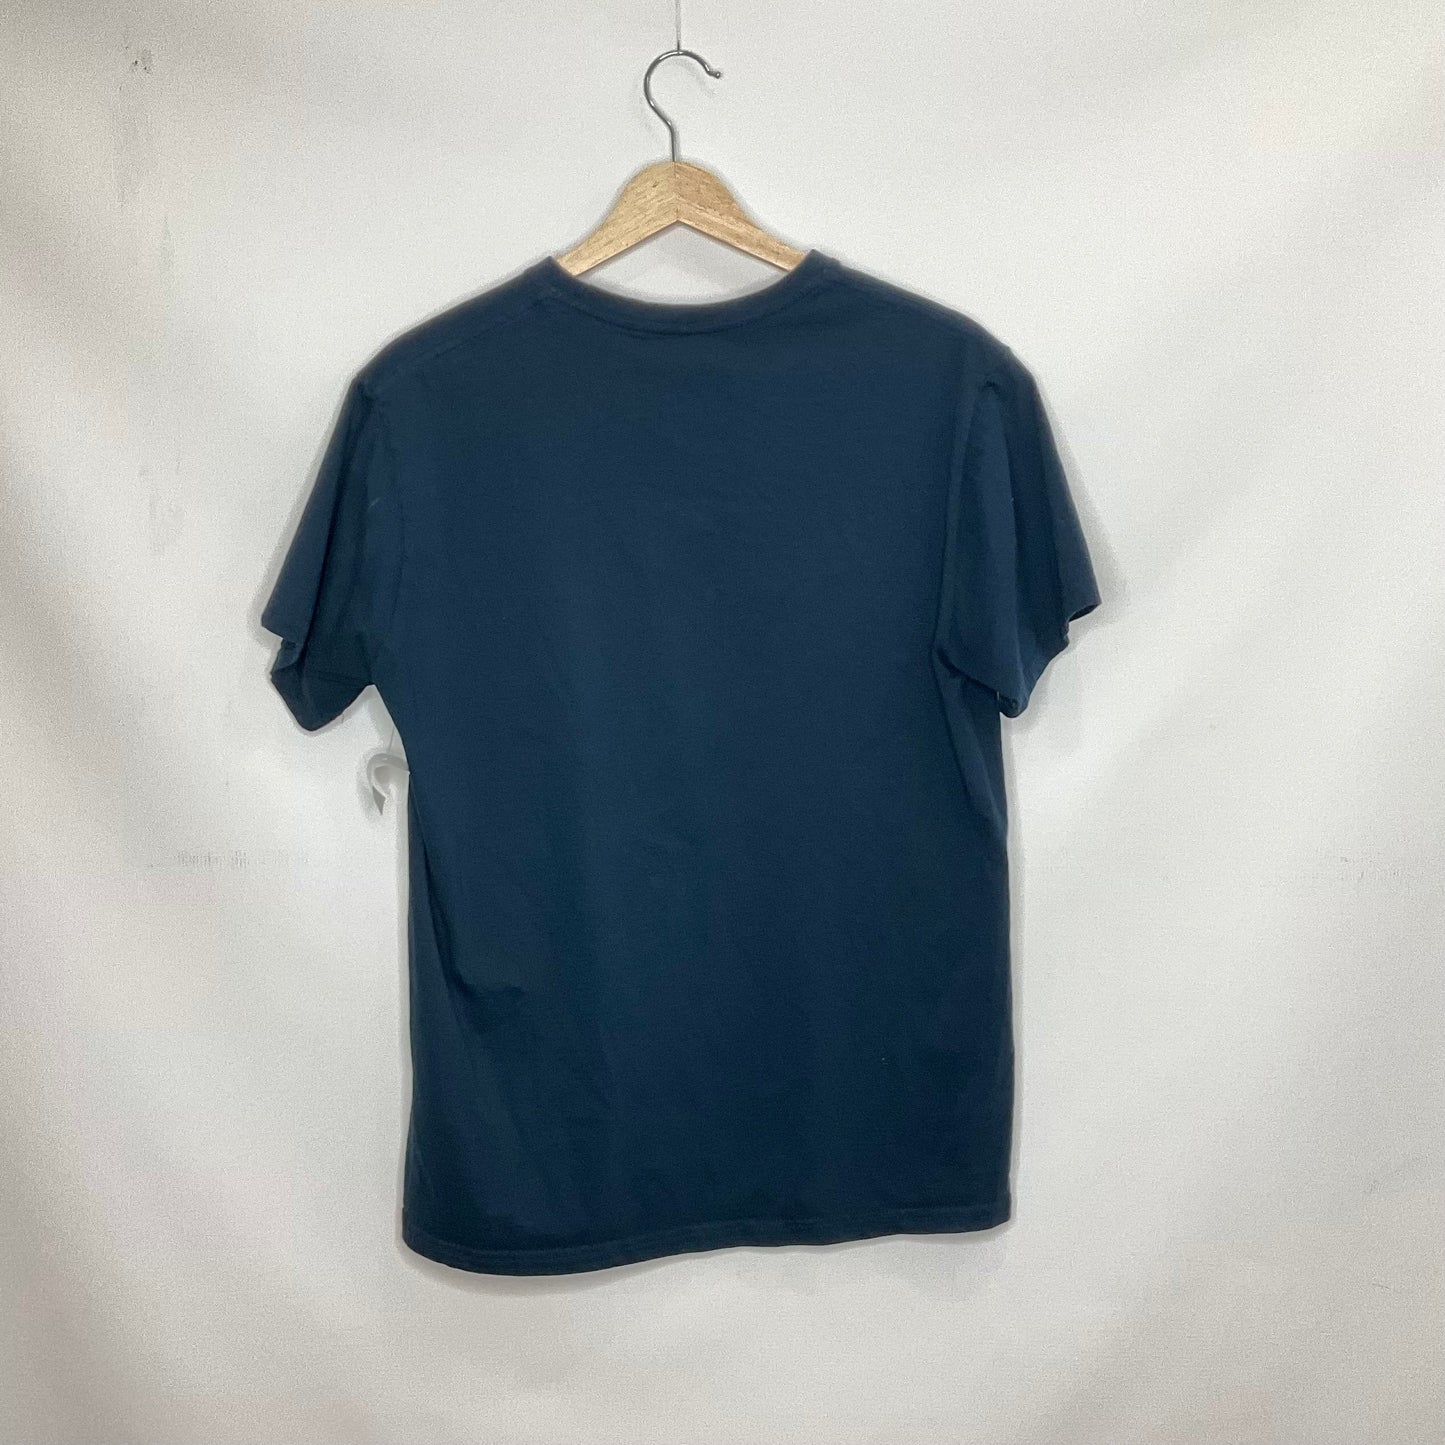 Navy Top Short Sleeve Basic Clothes Mentor, Size L